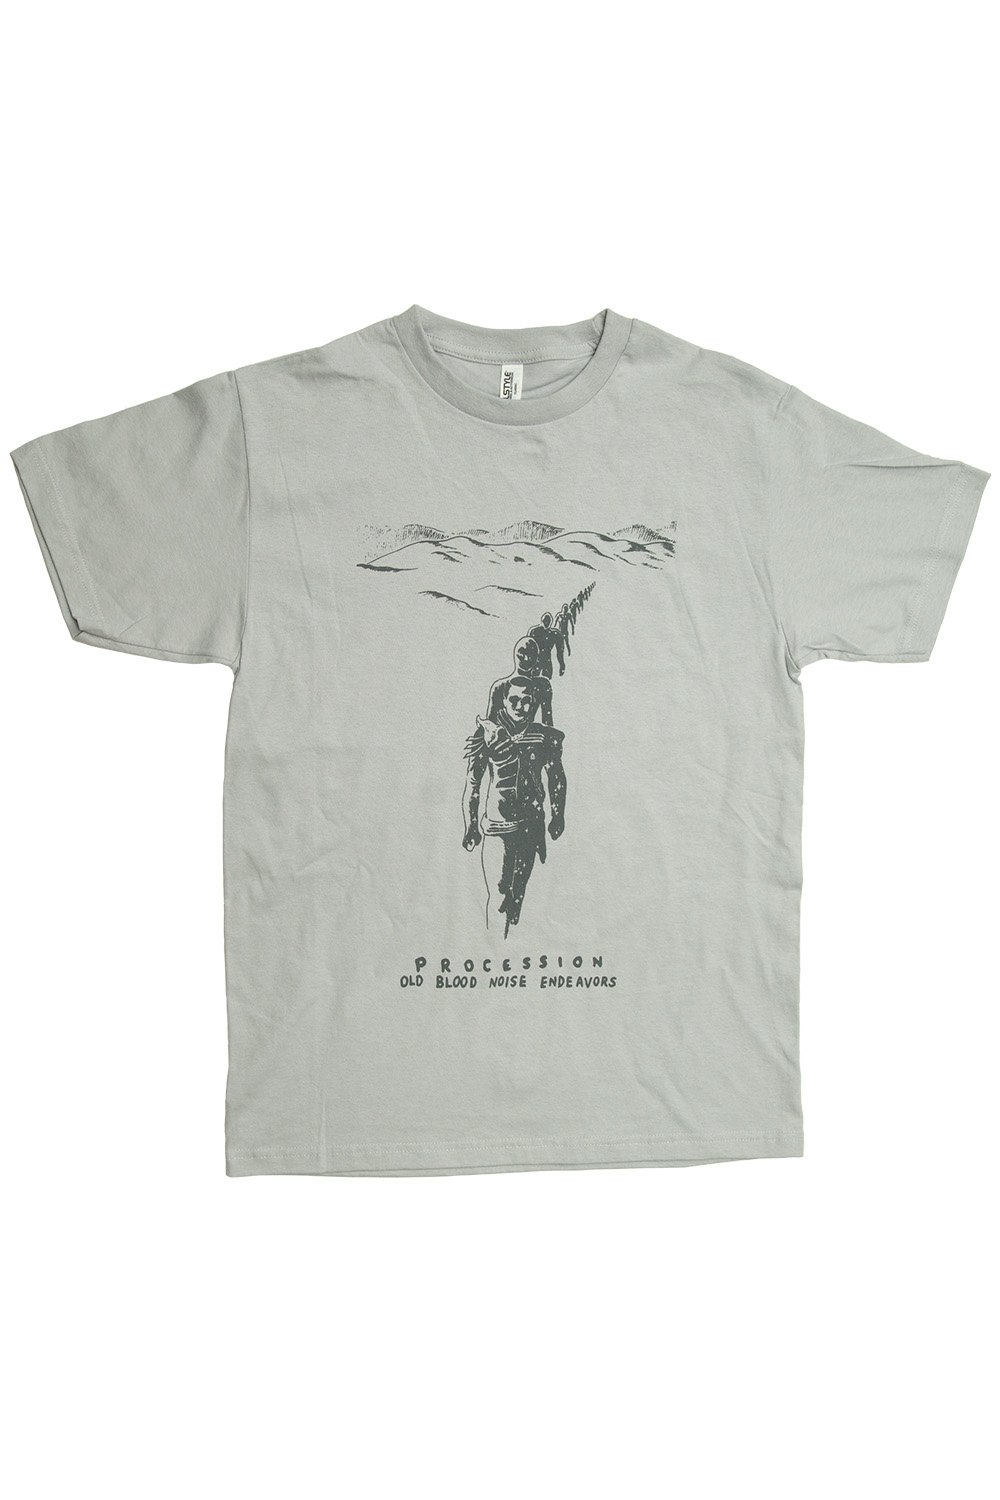 Aggregate Bee Pence old blood noise endeavors — T Shirt - Procession